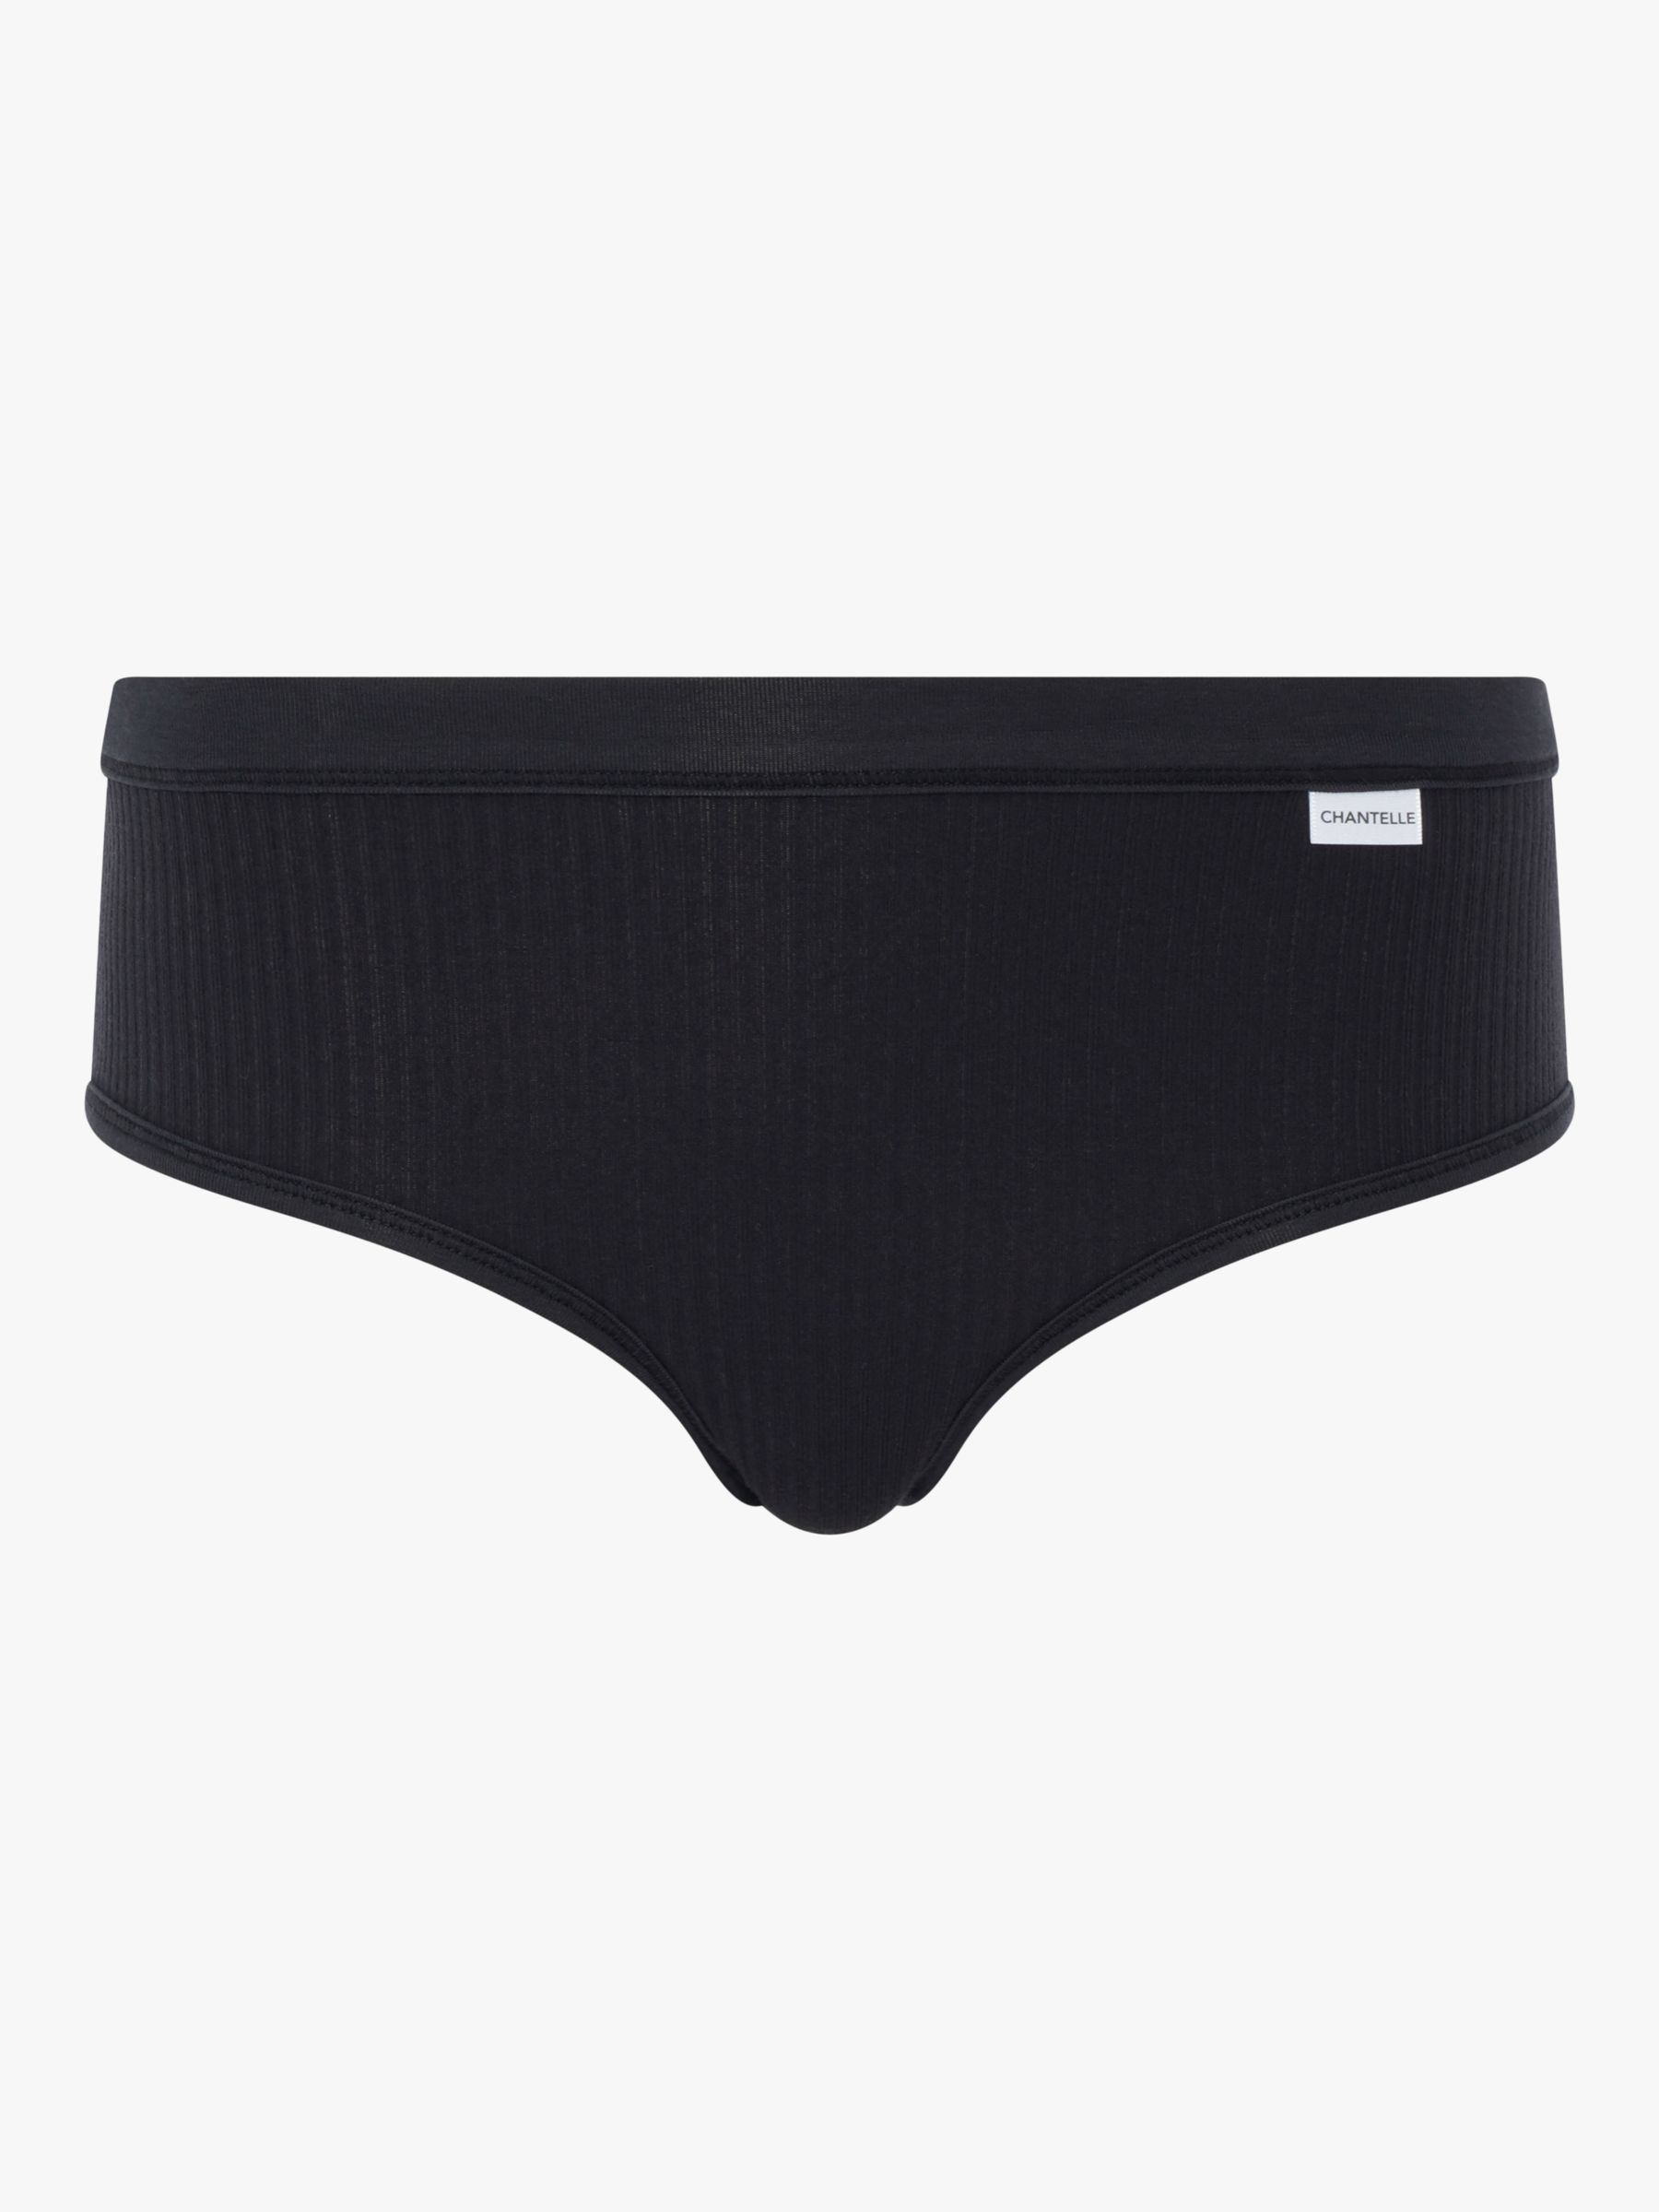 Chantelle Cotton Comfort Shorty Knickers, Black at John Lewis & Partners